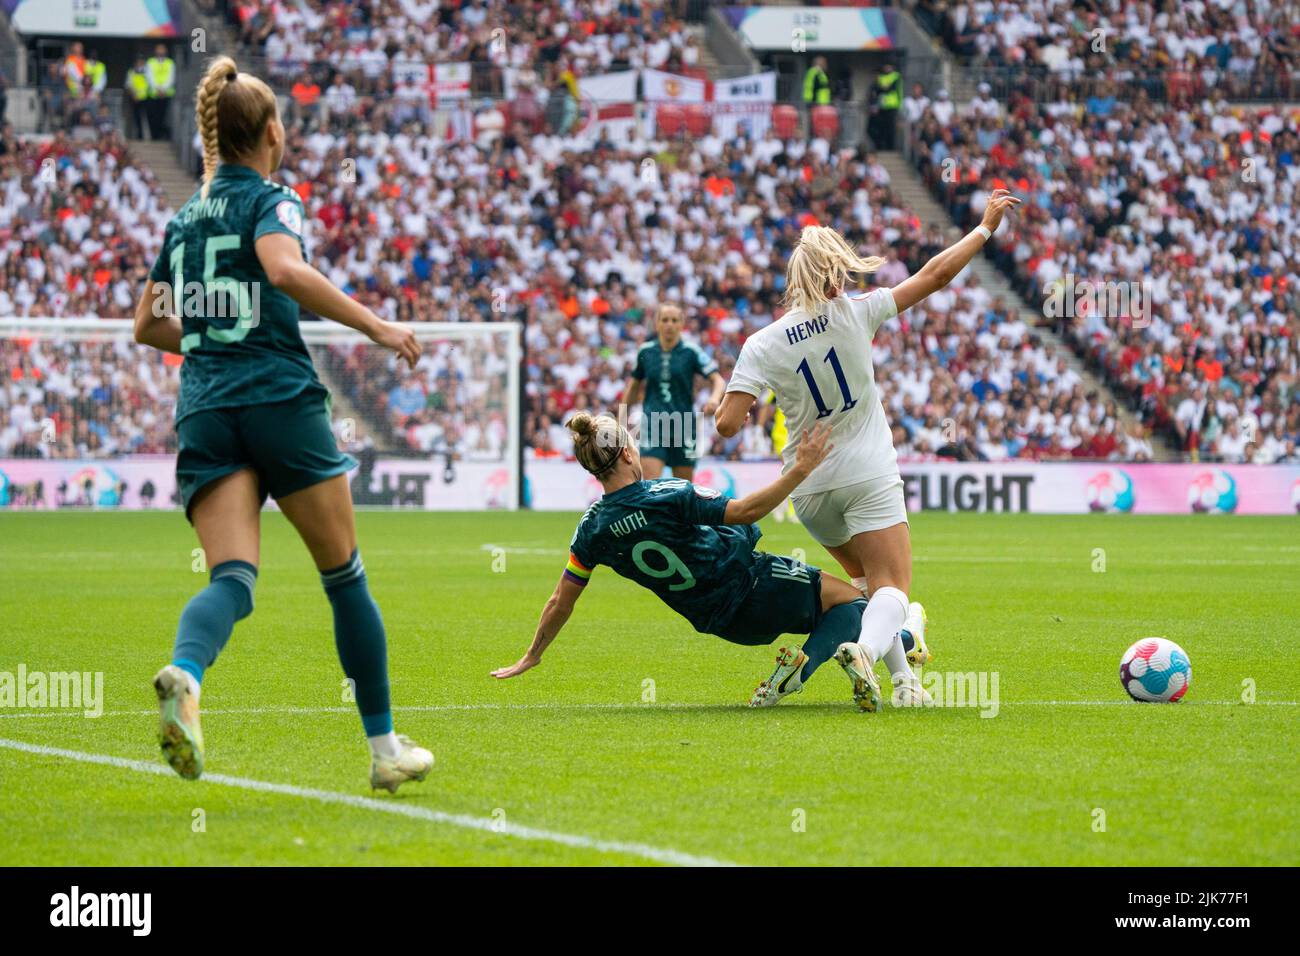 London, UK. 31st July, 2022. Svenja Huth (9 Germany) wins the ball off Lauren Hemp (11 England) with a slide tackle during the UEFA Womens Euro 2022 Final match between England and Germany at the Wembley Stadium in London, England. (Foto: Sam Mallia/Sports Press Photo/C - ONE HOUR DEADLINE - ONLY ACTIVATE FTP IF IMAGES LESS THAN ONE HOUR OLD - Alamy) Credit: SPP Sport Press Photo. /Alamy Live News Stock Photo